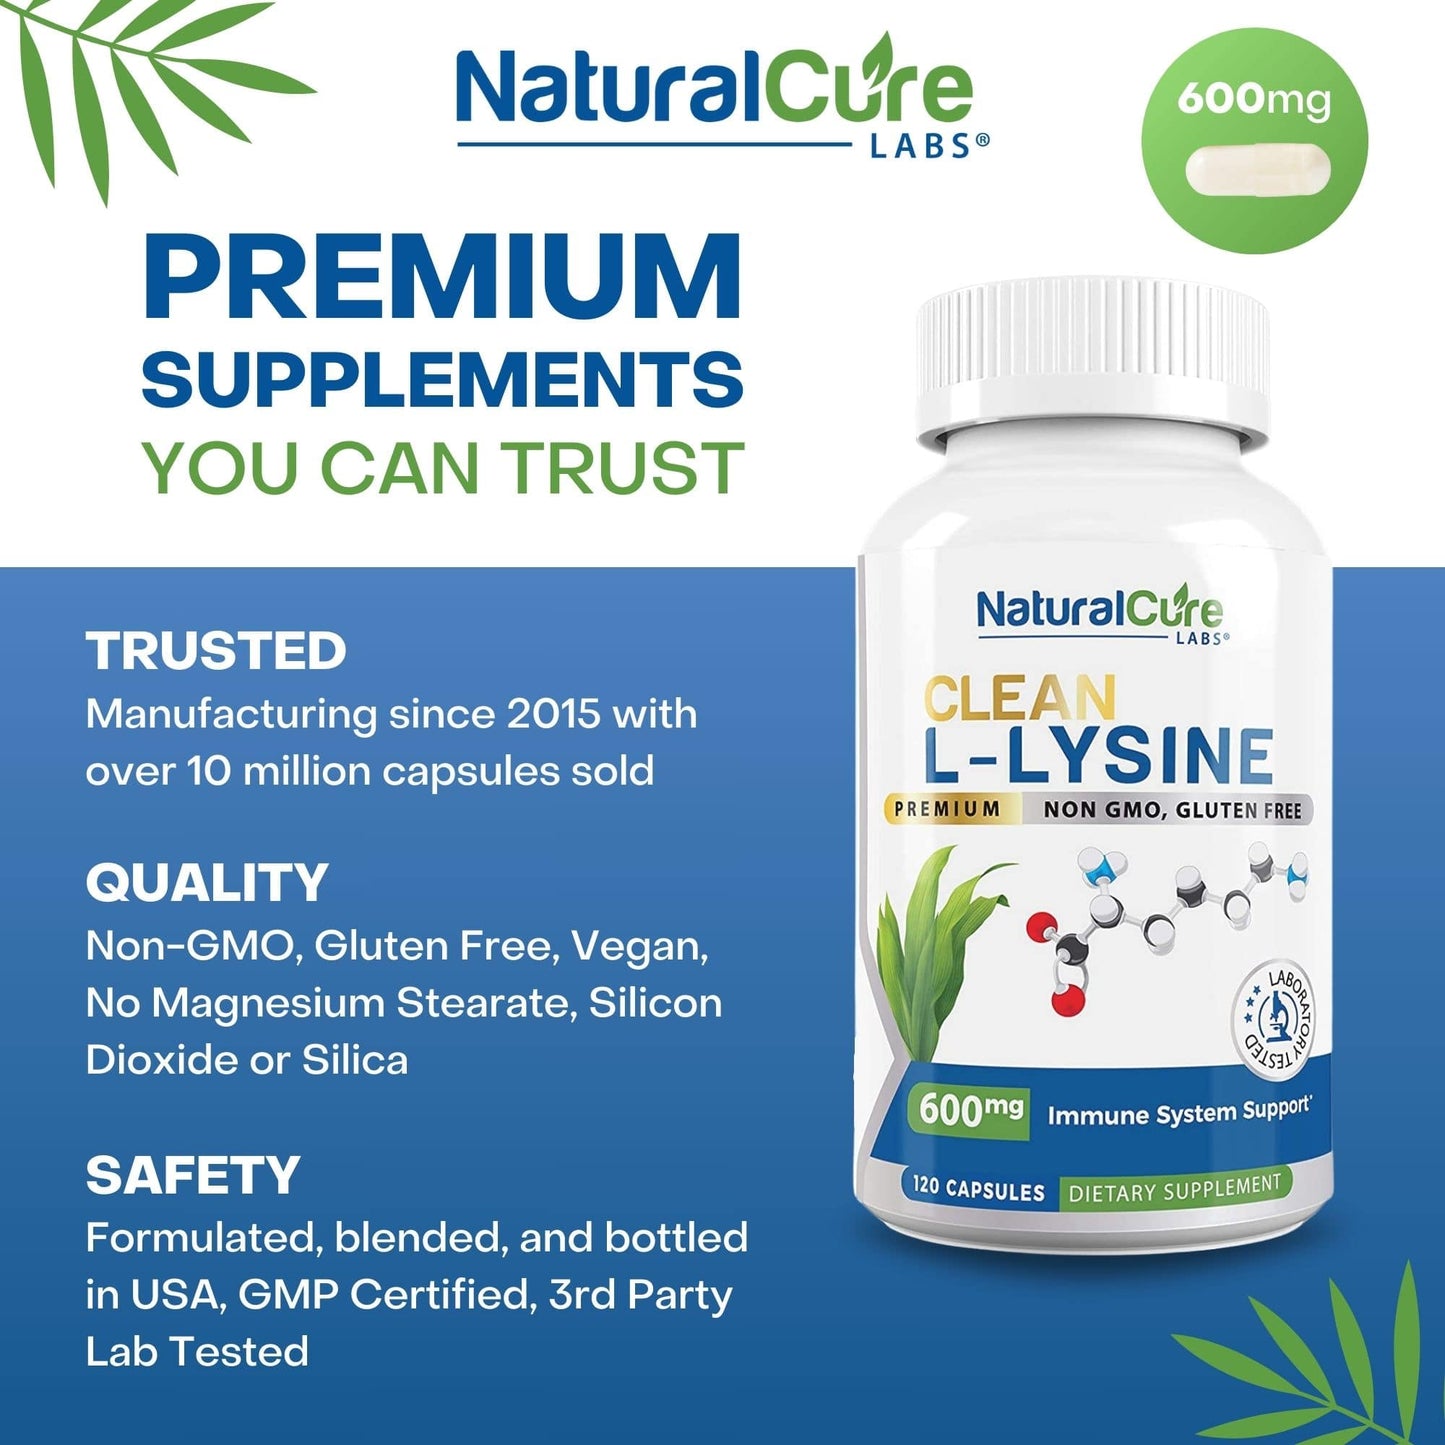 
                  
                    Image of NaturalCure Labs' 600mg Clean L-Lysine supplement bottle, highlighting non-GMO, gluten-free, and vegan qualities for immune system support.
                  
                